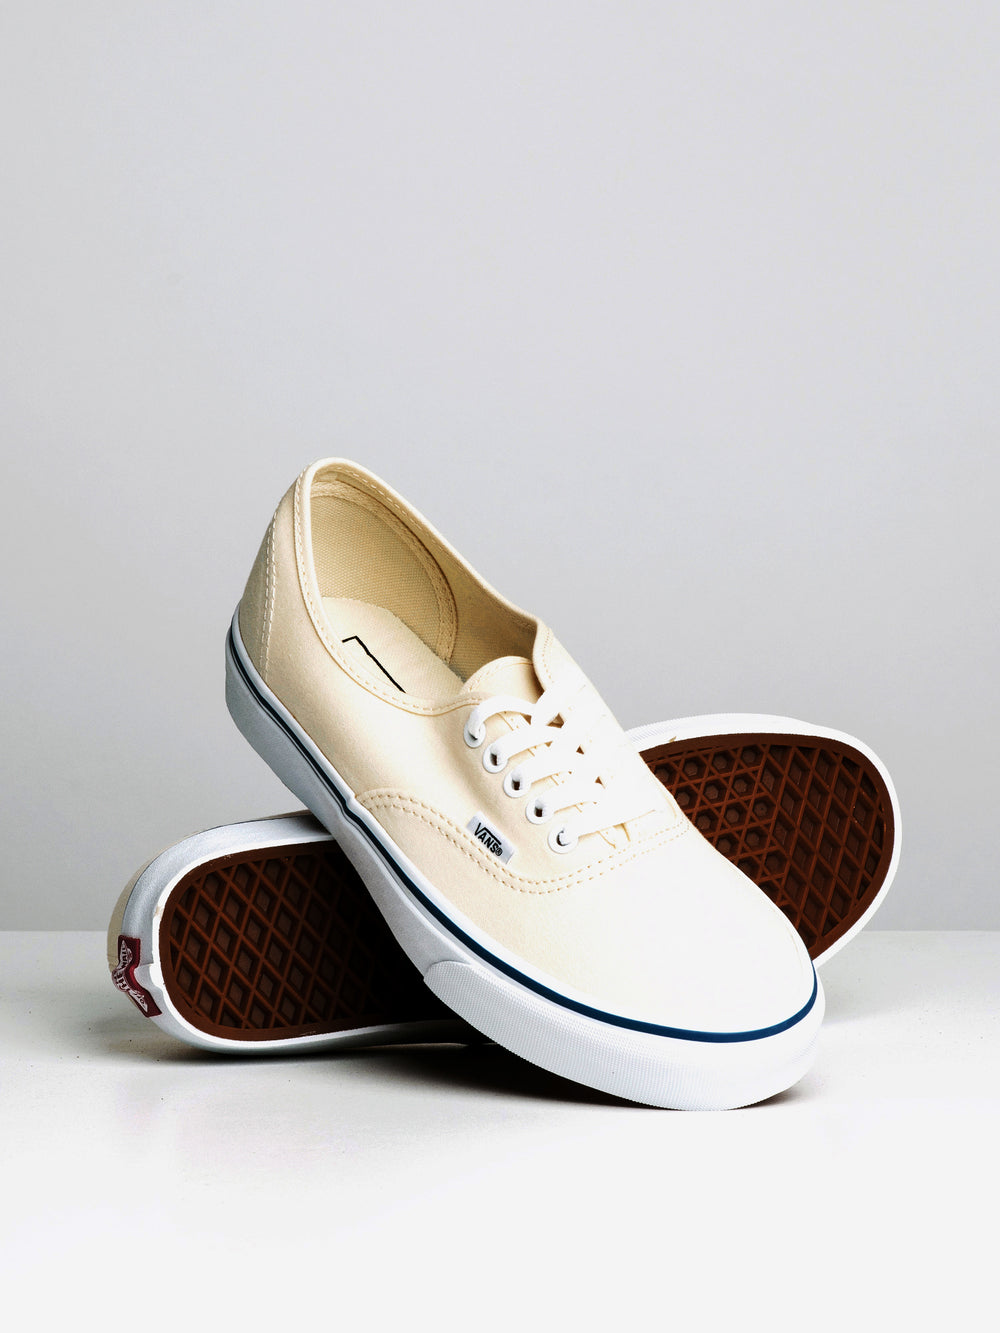 MENS VANS AUTHENTIC SNEAKERS - CLEARANCE